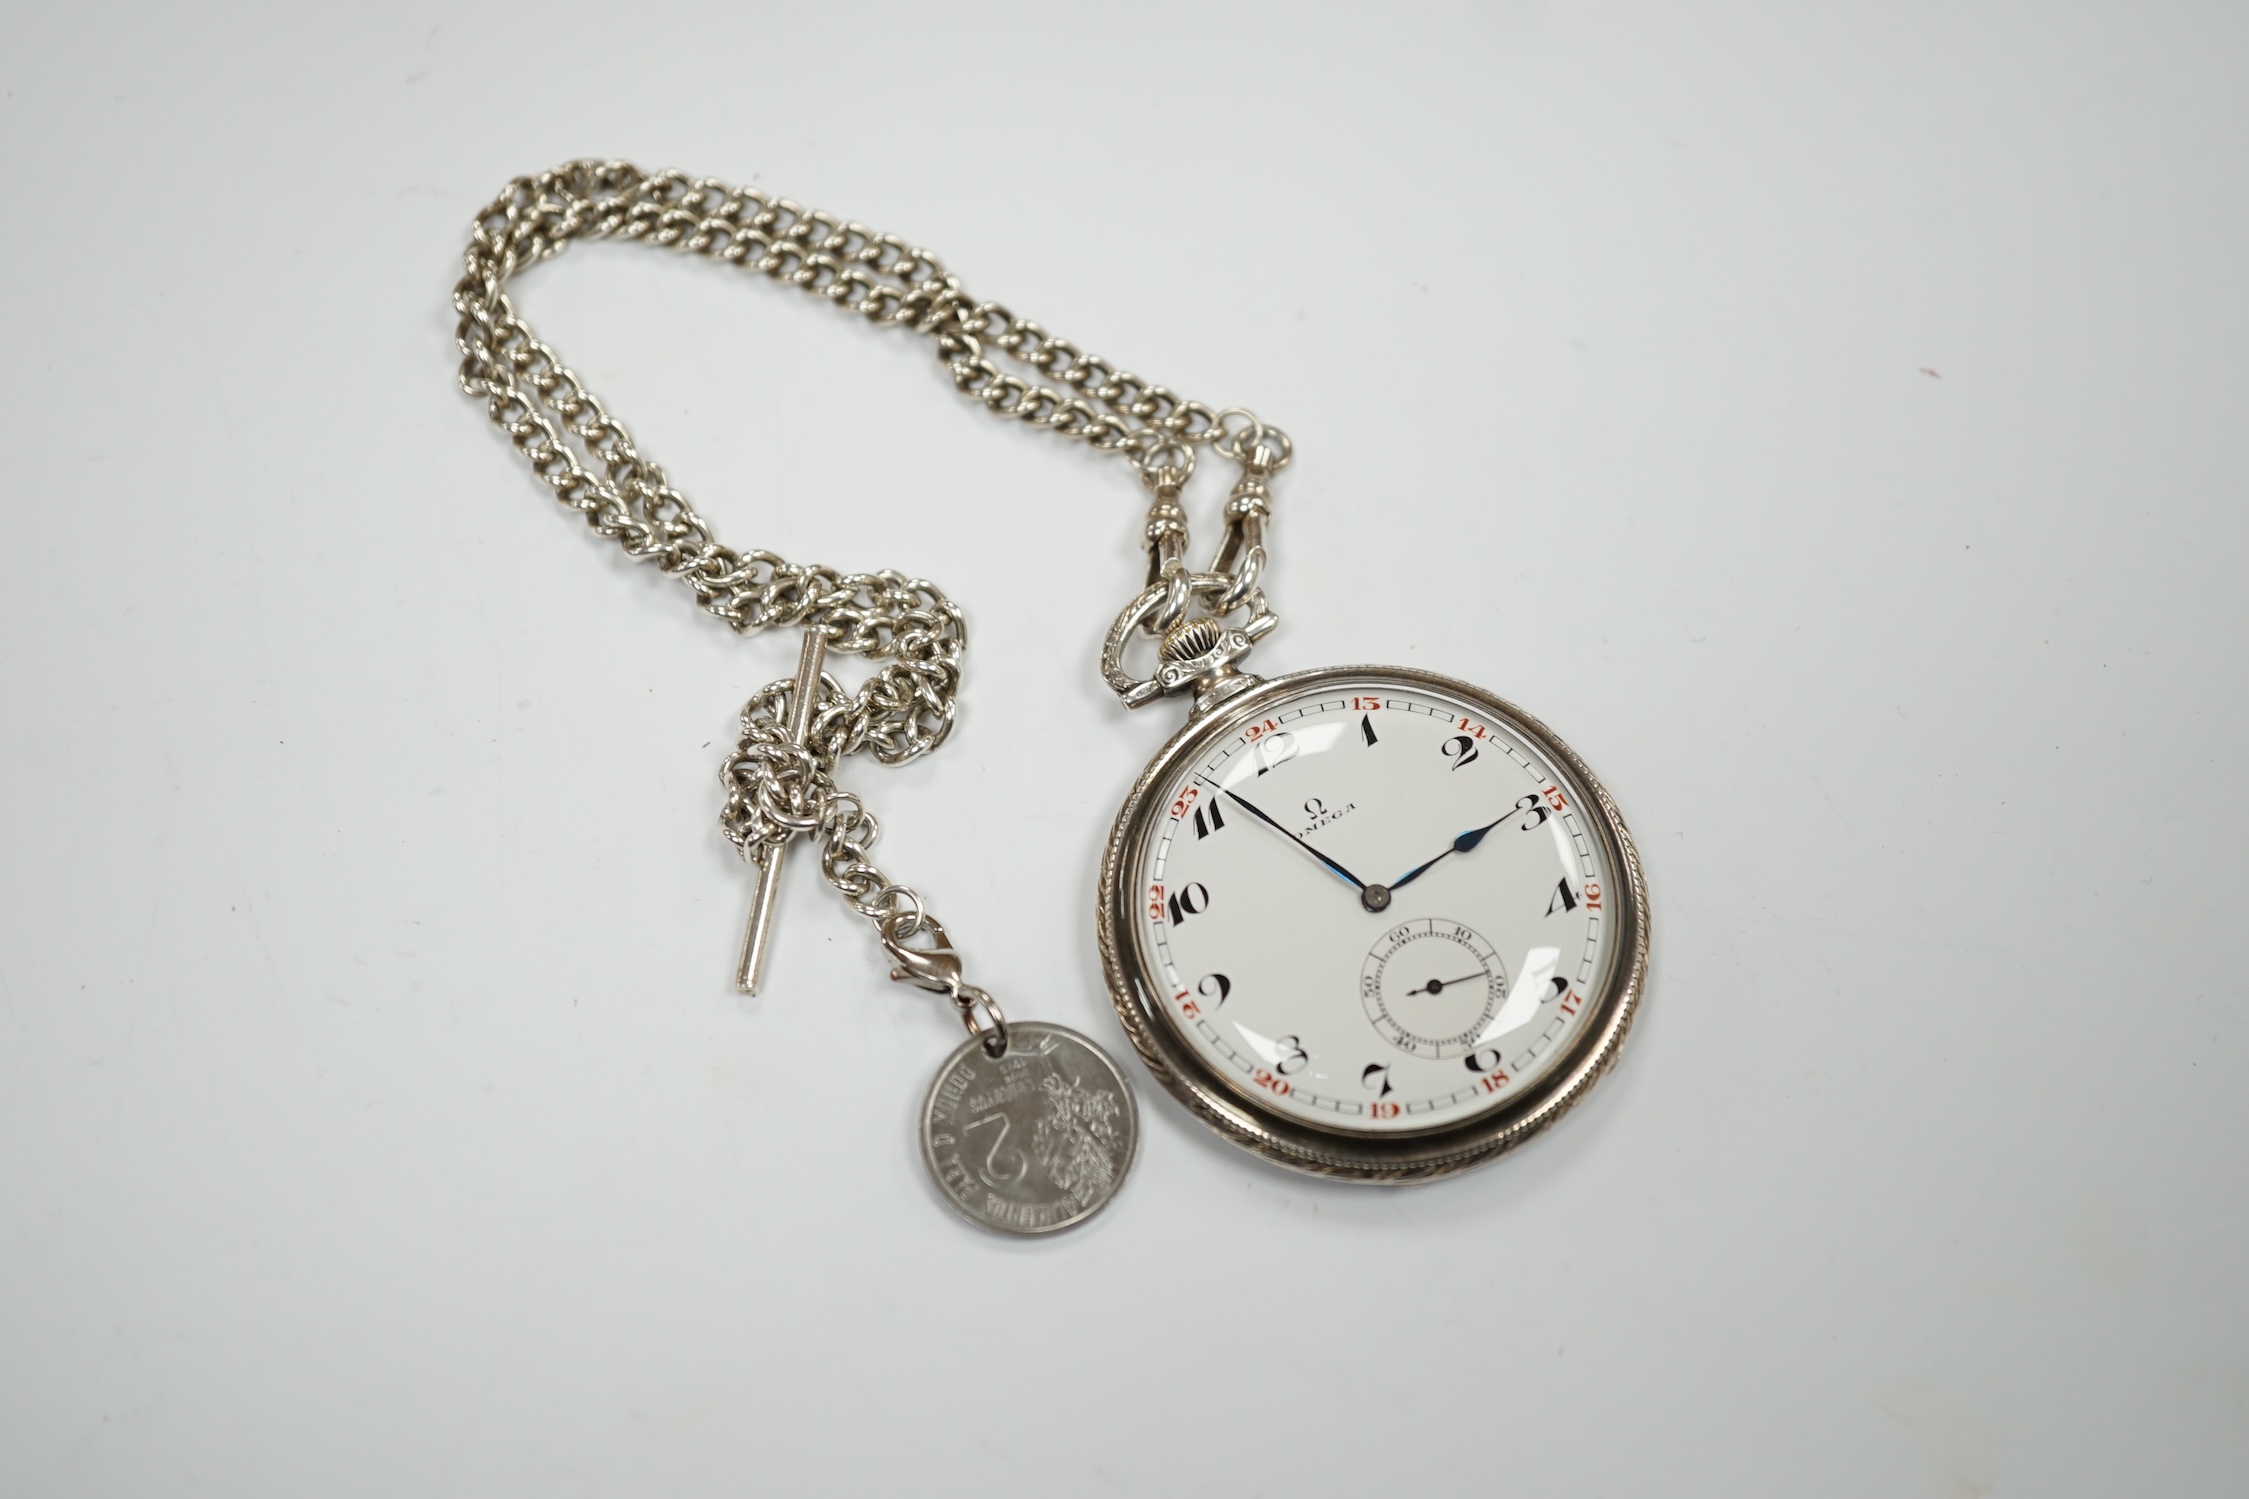 A German 900 standard cased Omega keyless open face dress pocket watch, with Arabic dial and - Image 4 of 7